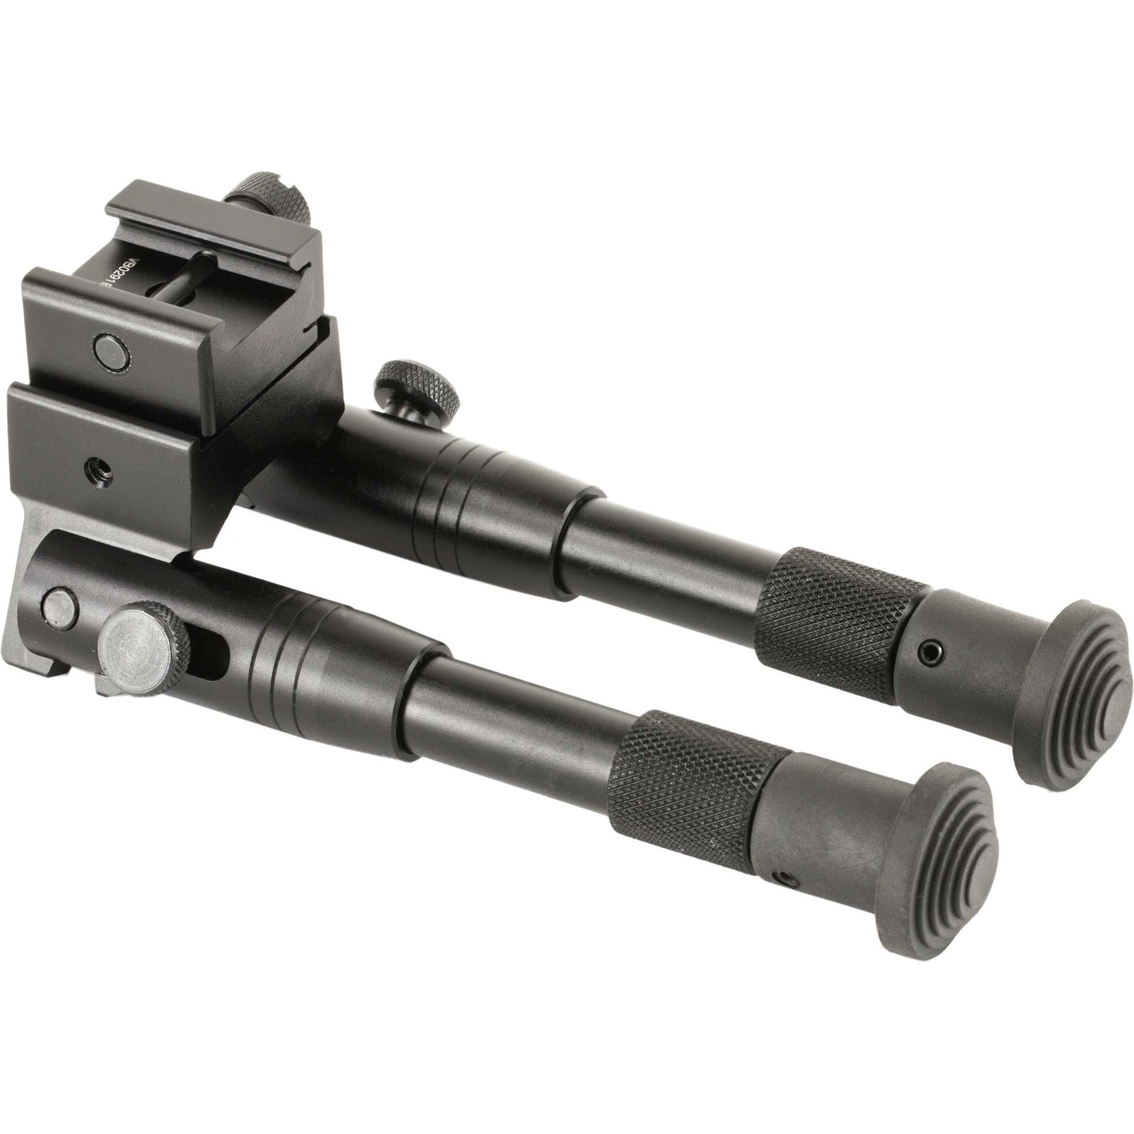 UTG SWAT Adjustable Bipod 6.7 to 7.5 in. Fits Picatinny - Image 2 of 2